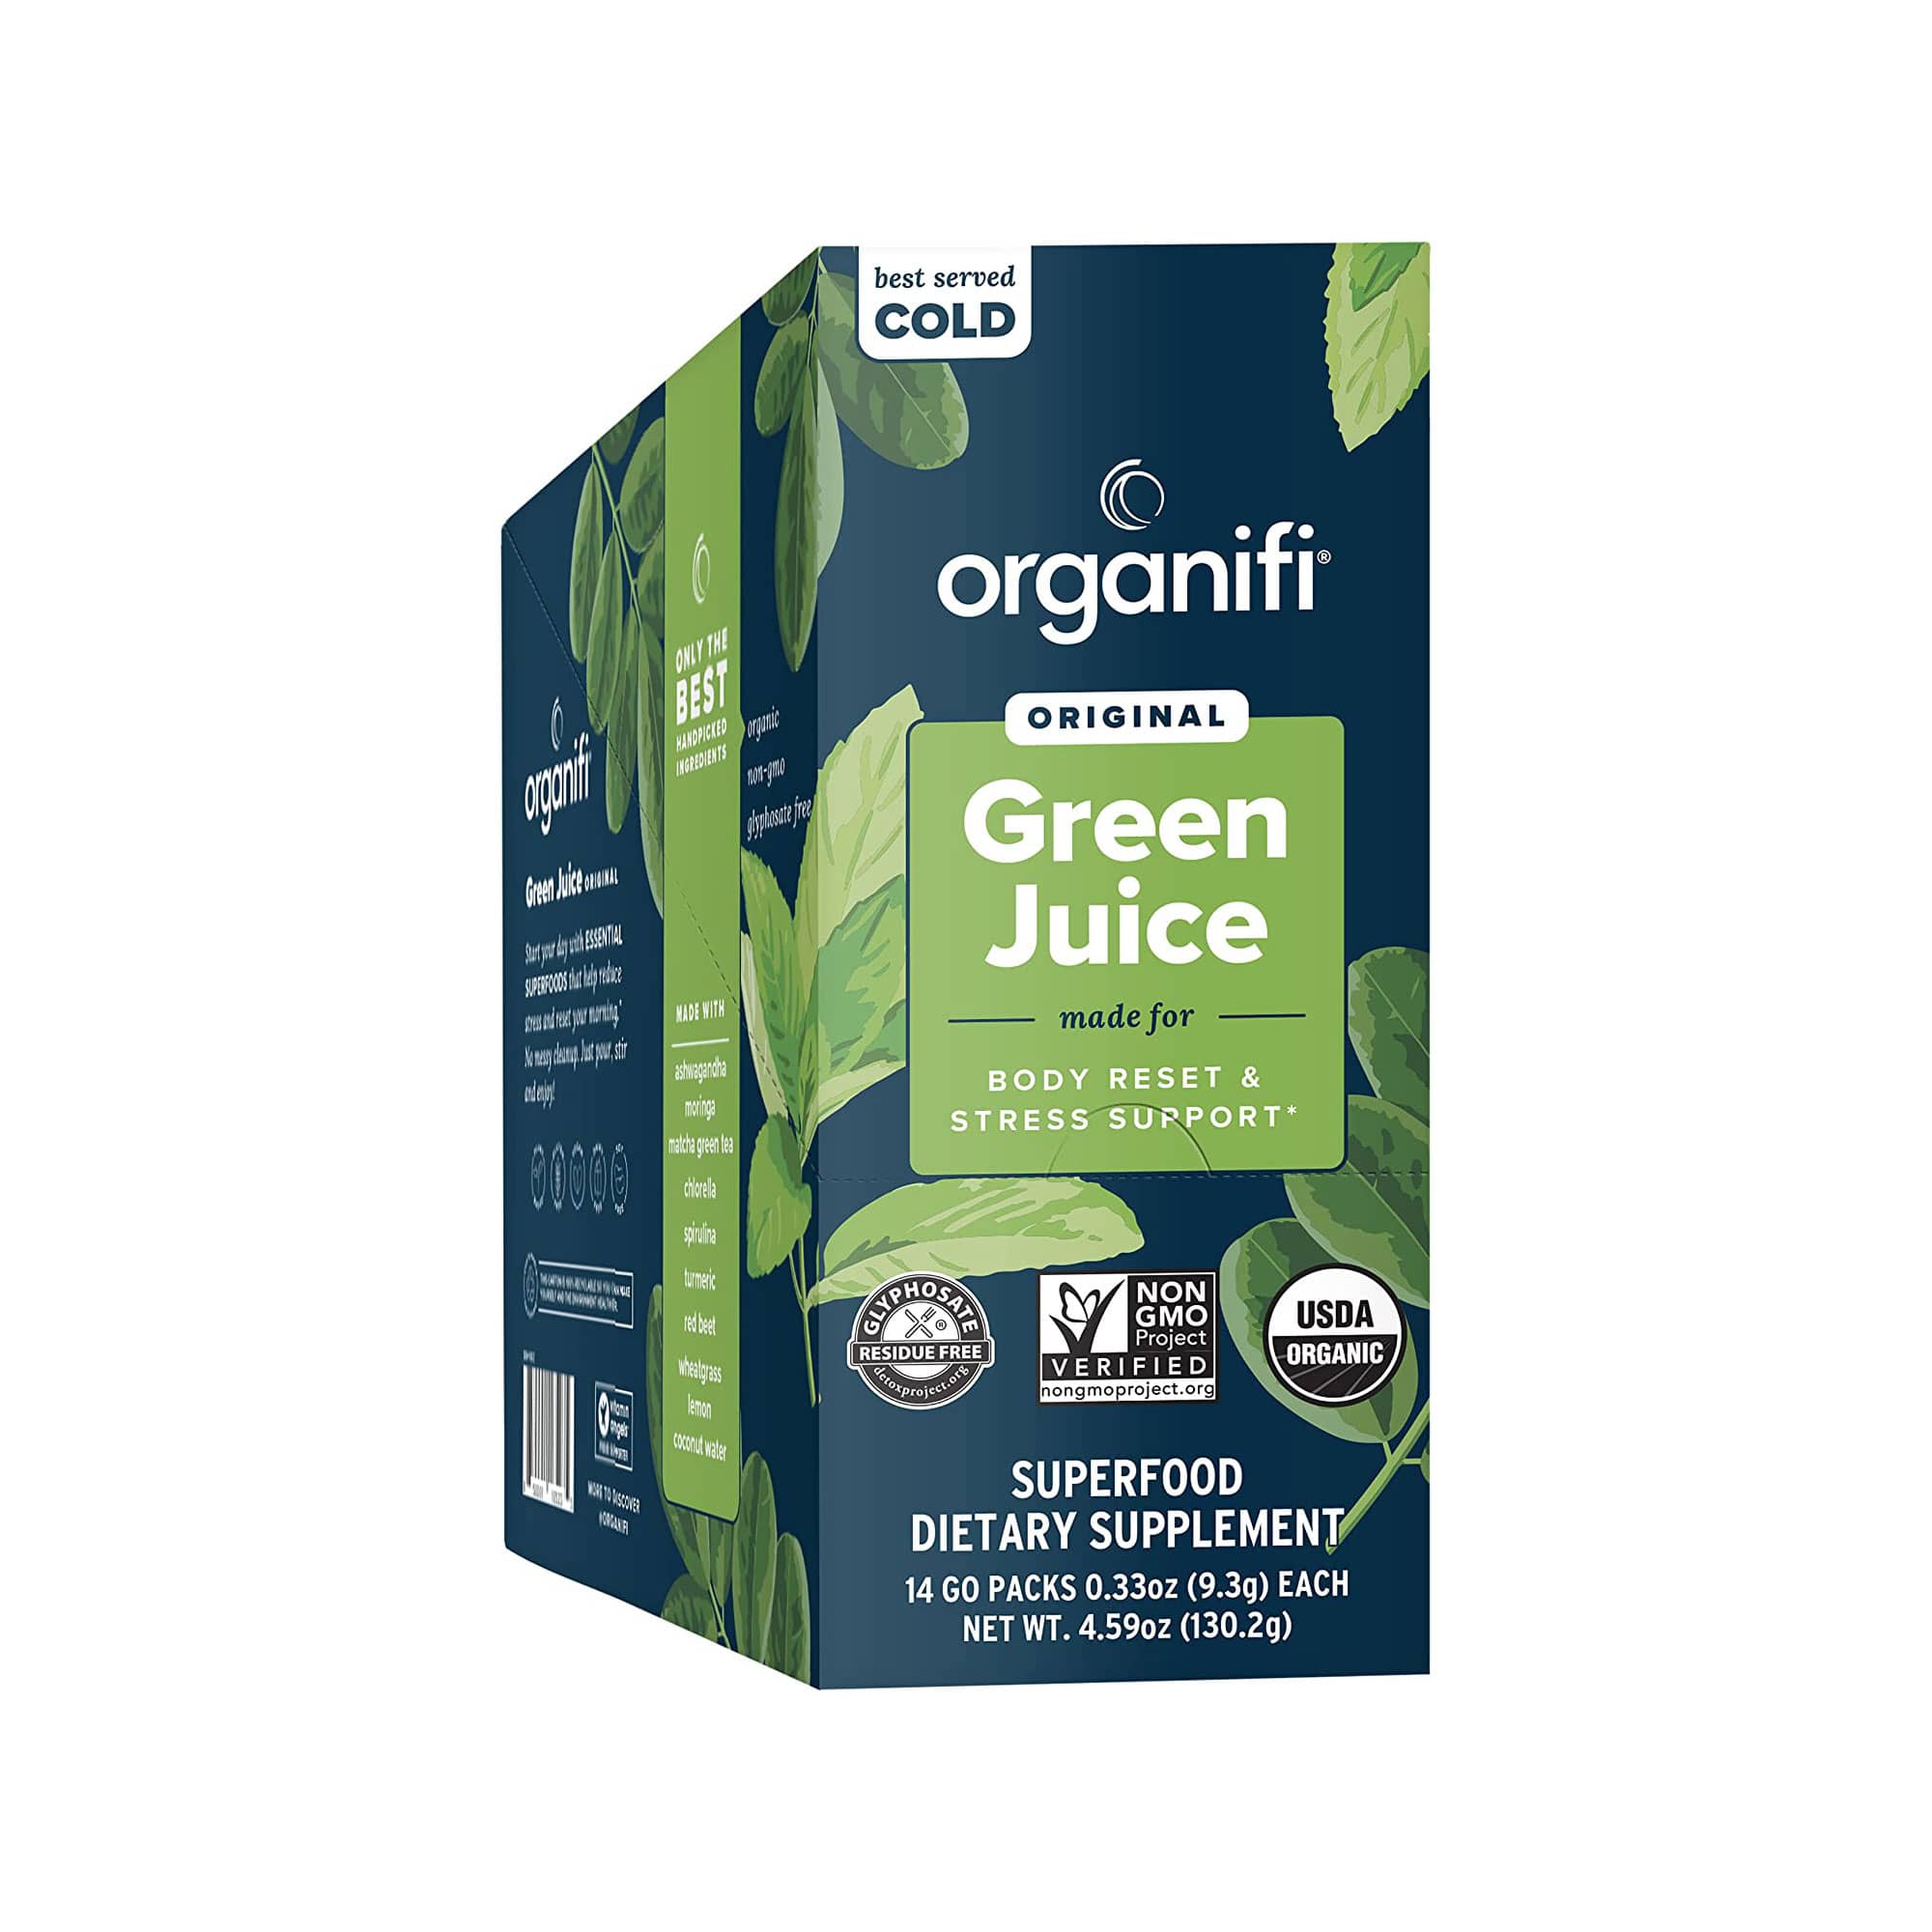 What Does Organifi Go Green Juice Organic Superfood Supplement ... Mean?